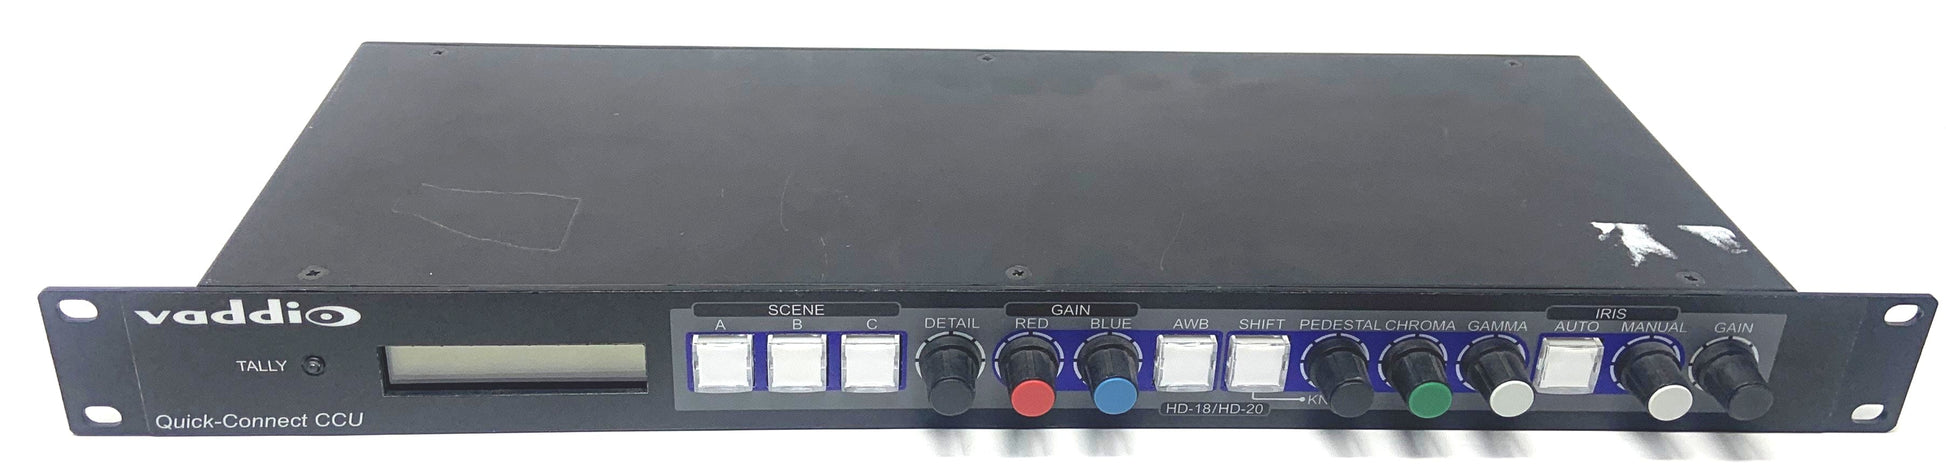 Vaddio 998-1105-015 Quick-Connect CCU Camera Image Control - PSSL ProSound and Stage Lighting